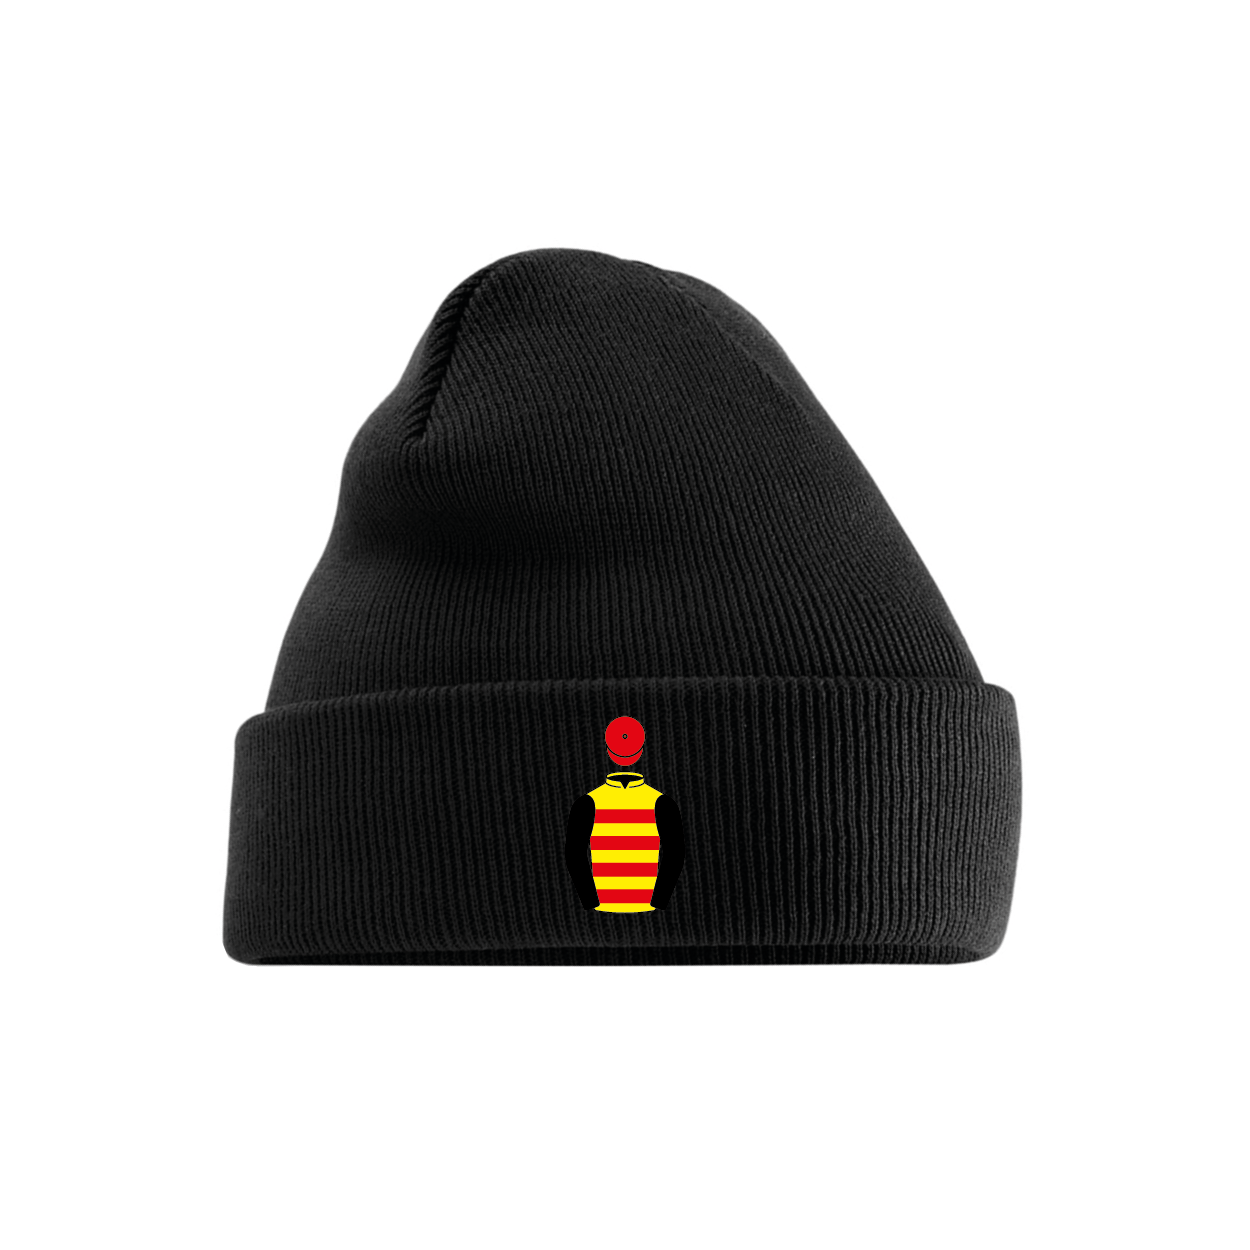 The Moggy Syndicate Embroidered Cuffed Beanie - Hacked Up